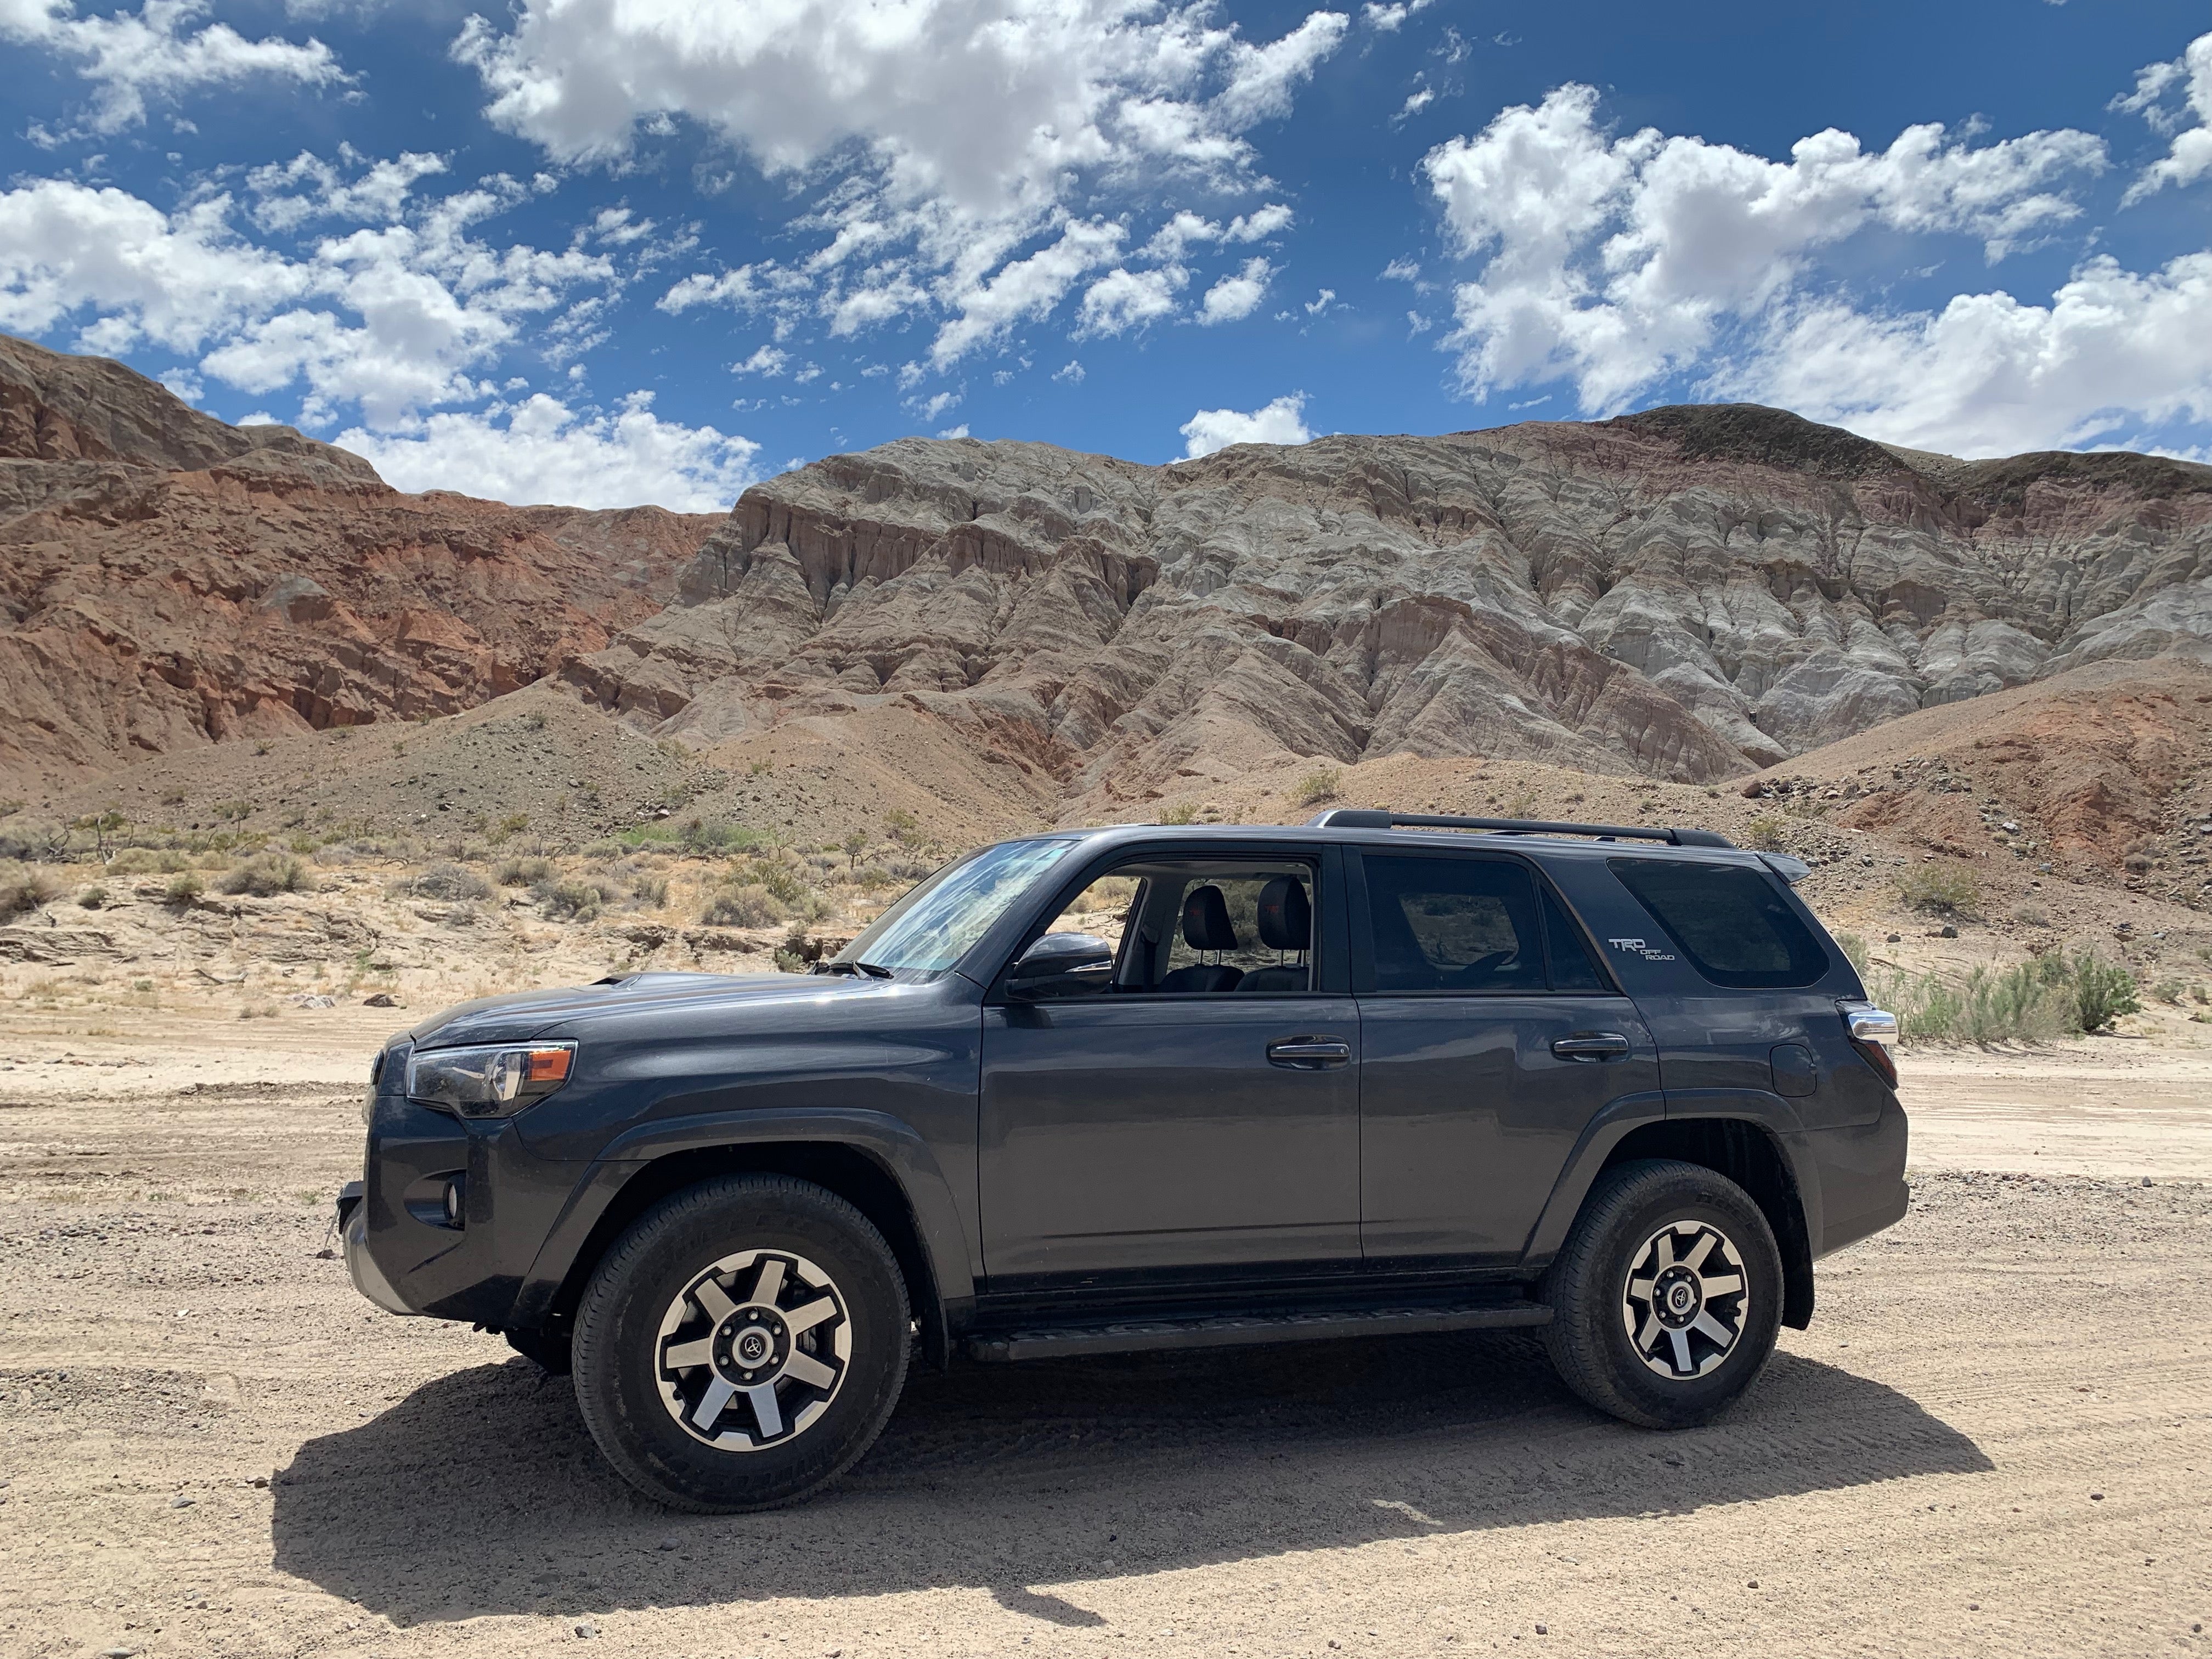 Our 4Runner further up Afton Canyon on the Mojave Road